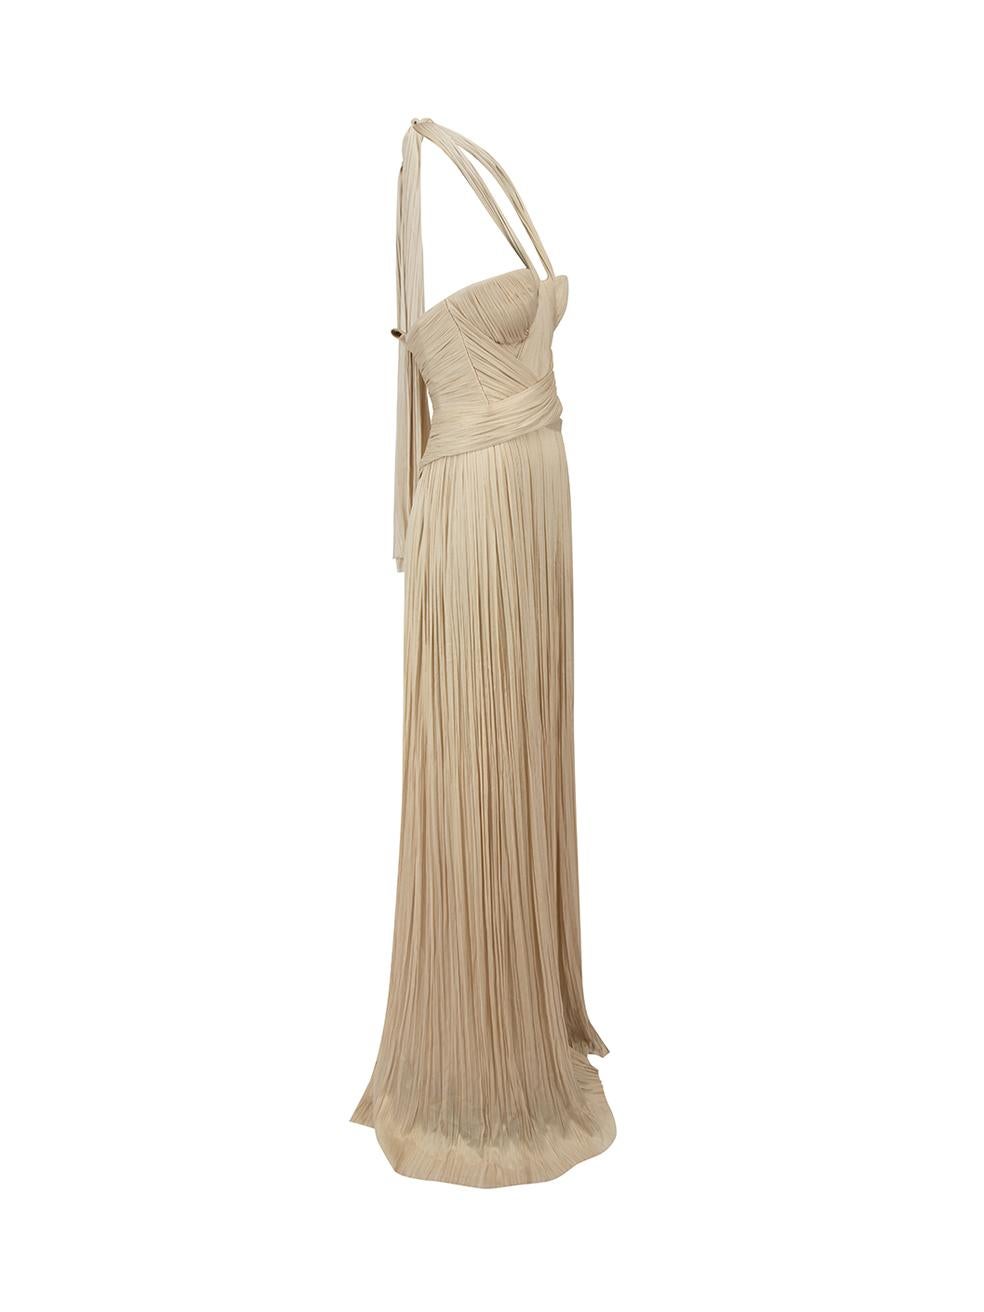 CONDITION is Very good. Hardly any visible wear to gown is evident on this used Maria Lucia Hohan designer resale item.



Details


Beige

Silk

Gown

Strapless

Sweetheart neckline

Pleated drape detail

Back hook fastening



Made in